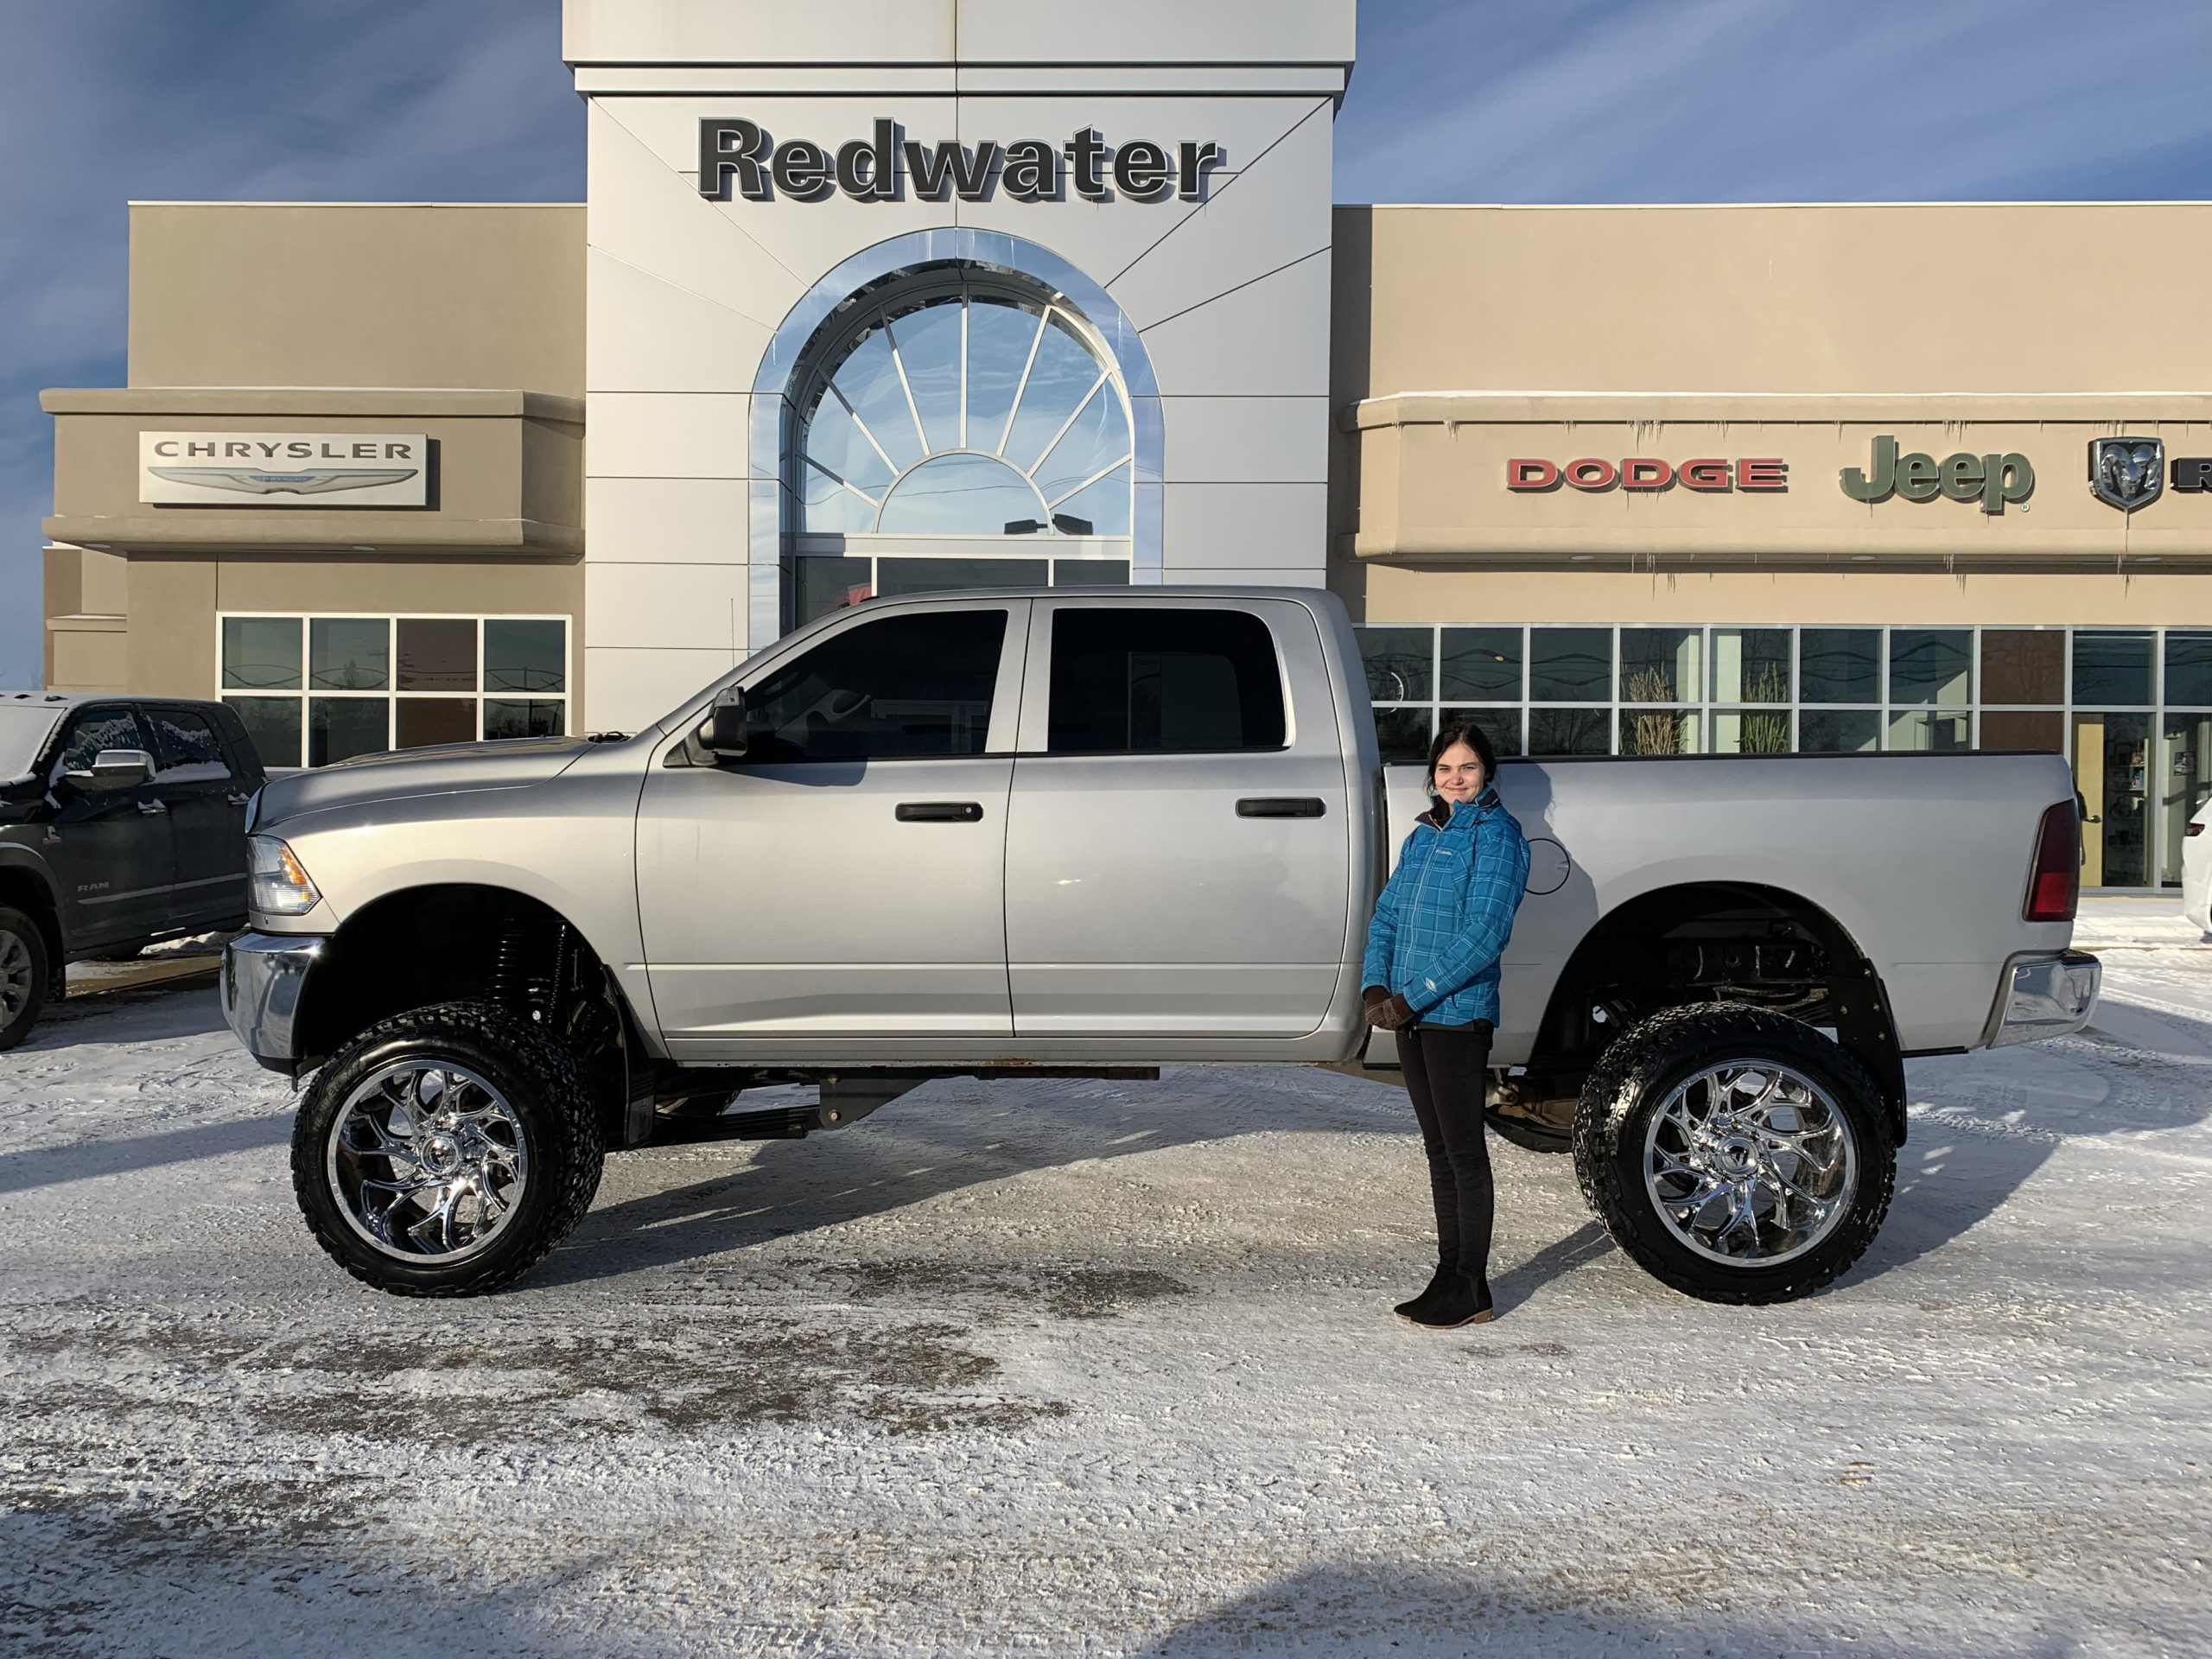 MGH6447B 2014 Ram 3500 SLT Crew Cab 4x4 Wholesale Special Redwater Dodge